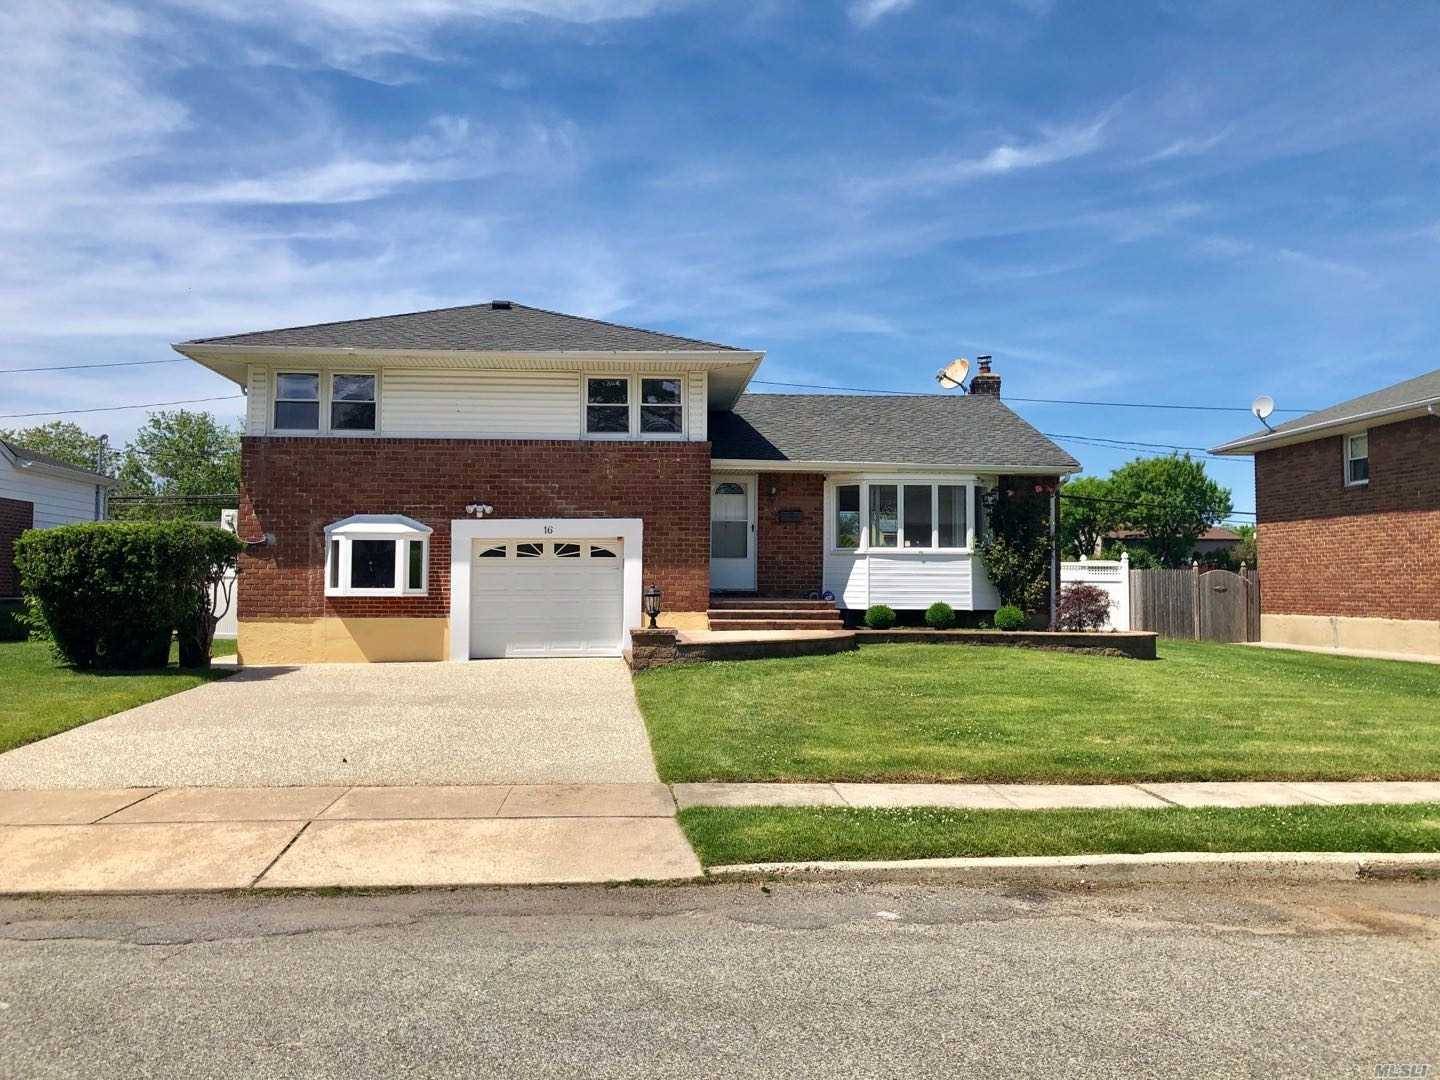 Syosset school, New stone driveway, New staircase, 4 bedroom, 3 Full bath, CAC, new carpet, new office with deck and in grand pool, a must see sunny house !